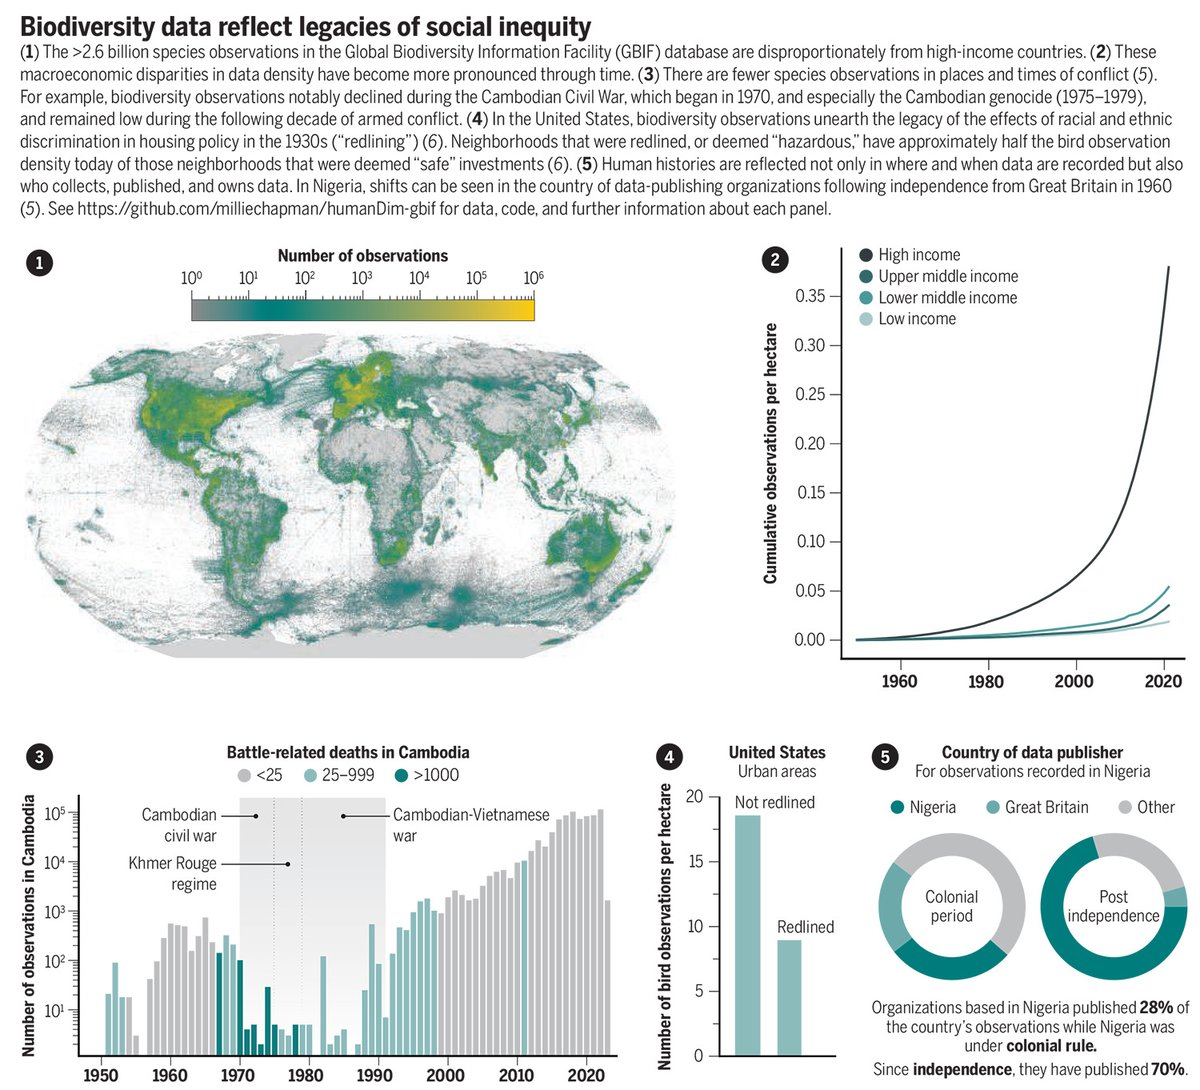 Global biodiversity data used to make major policy and conservation investment decisions reflect legacies of social and political inequities.

A new #SciencePolicyForum highlights this issue and its implications for global conservation policy and planning. scim.ag/5rM